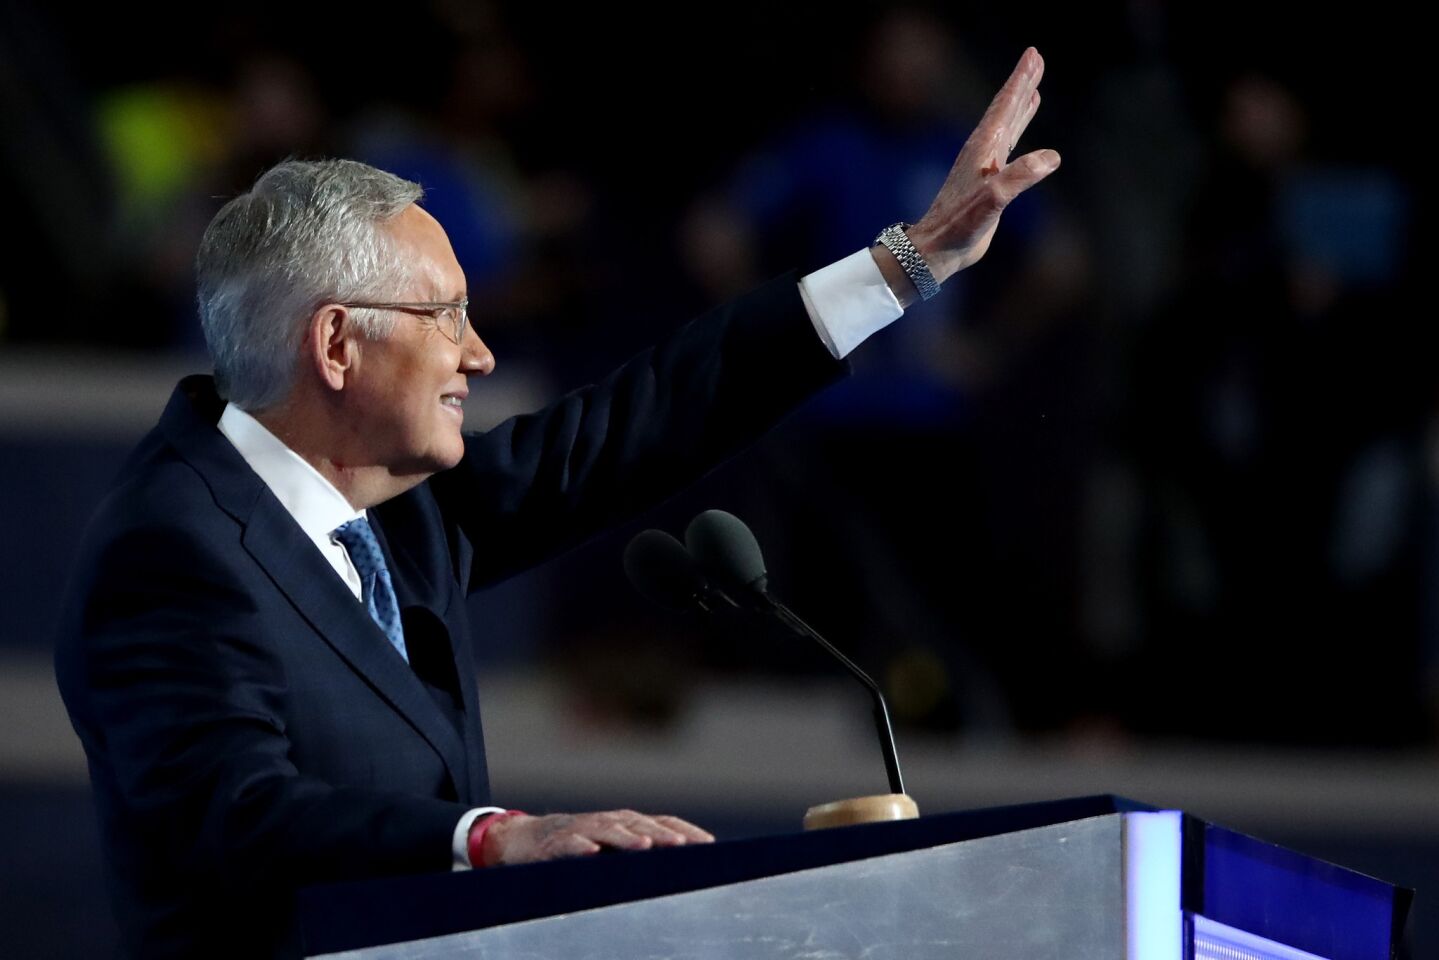 Sen. Harry Reid waves to the crowd before delivering remarks on the third day of the Democratic National Convention in Philadelphia.